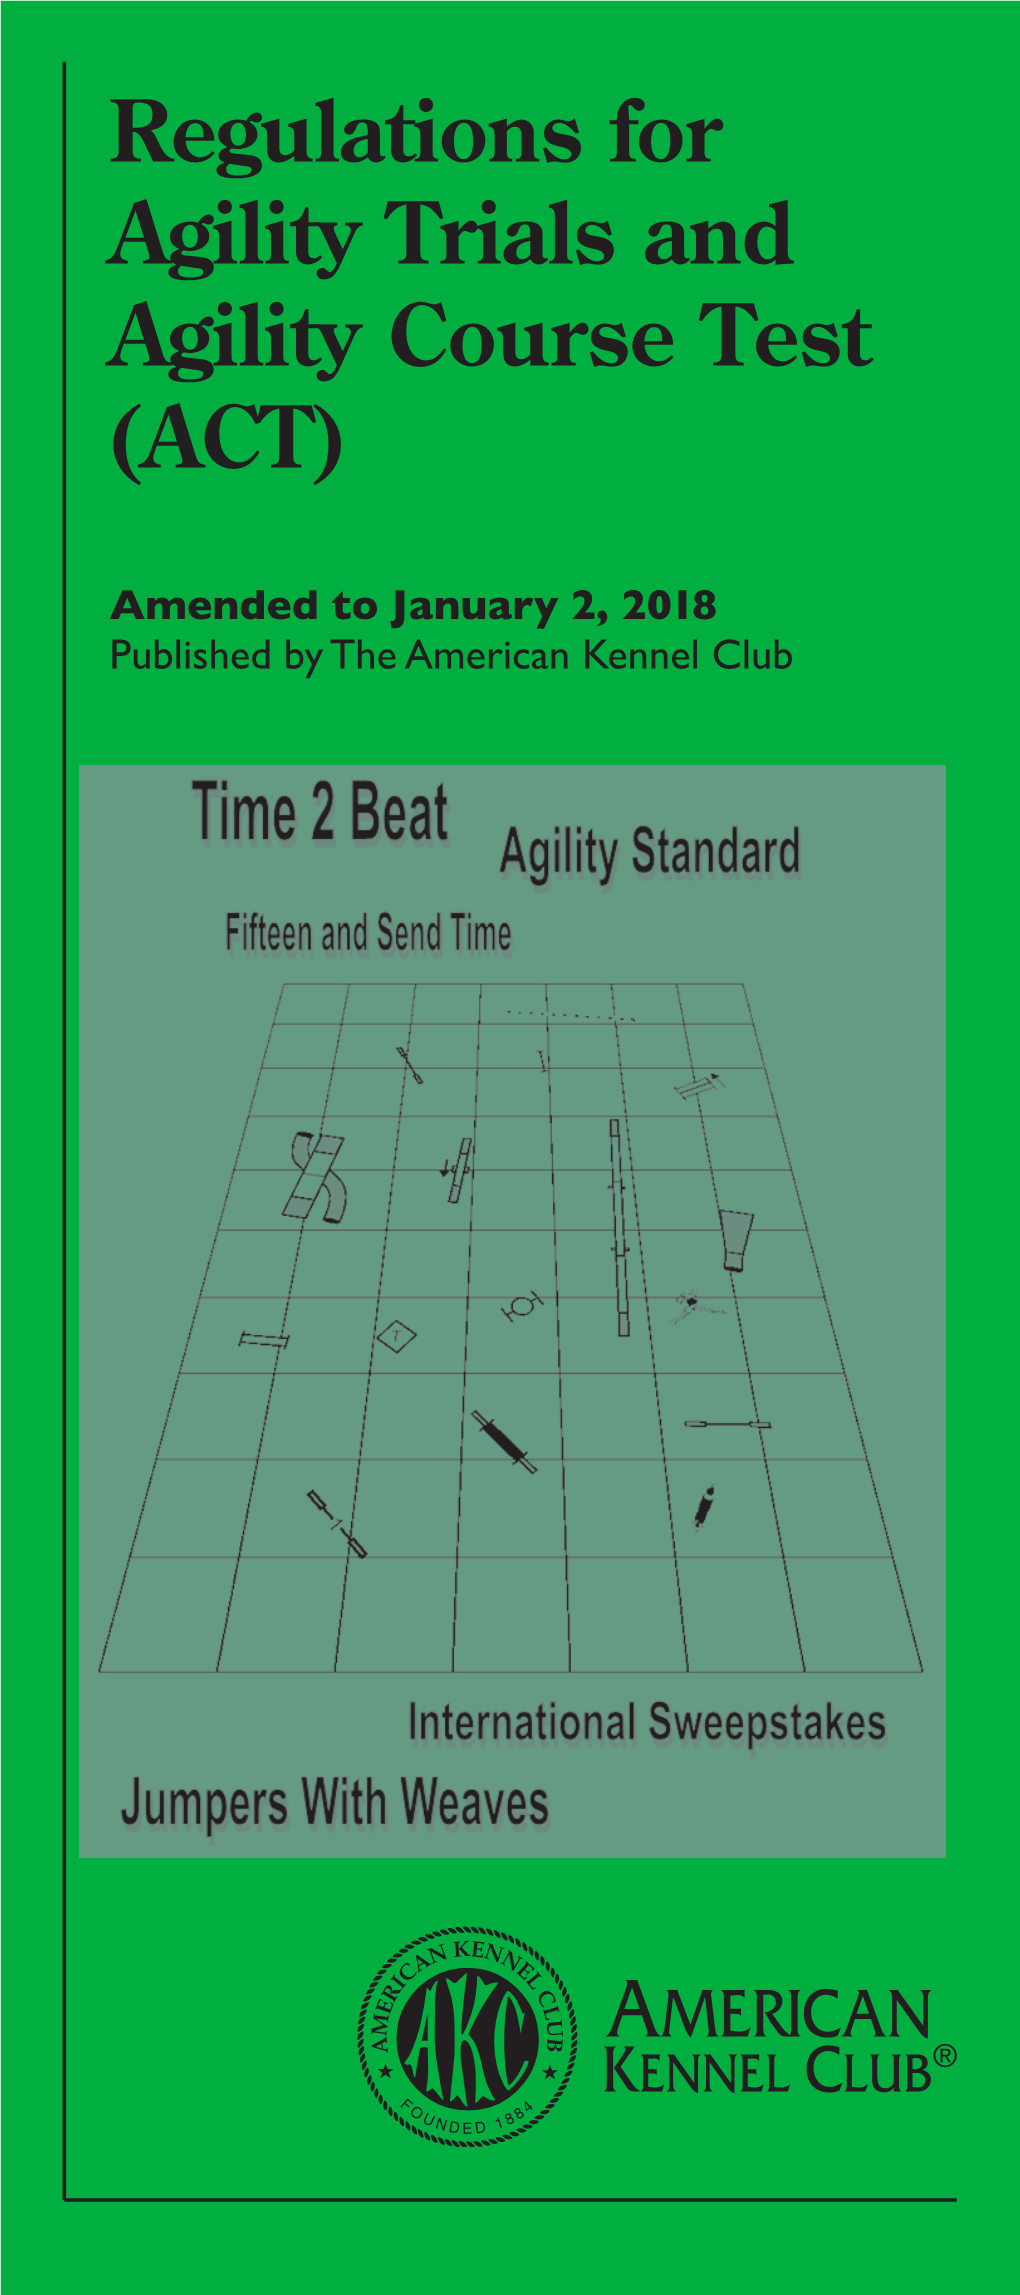 Regulations for Agility Trials and Agility Course Test (ACT)